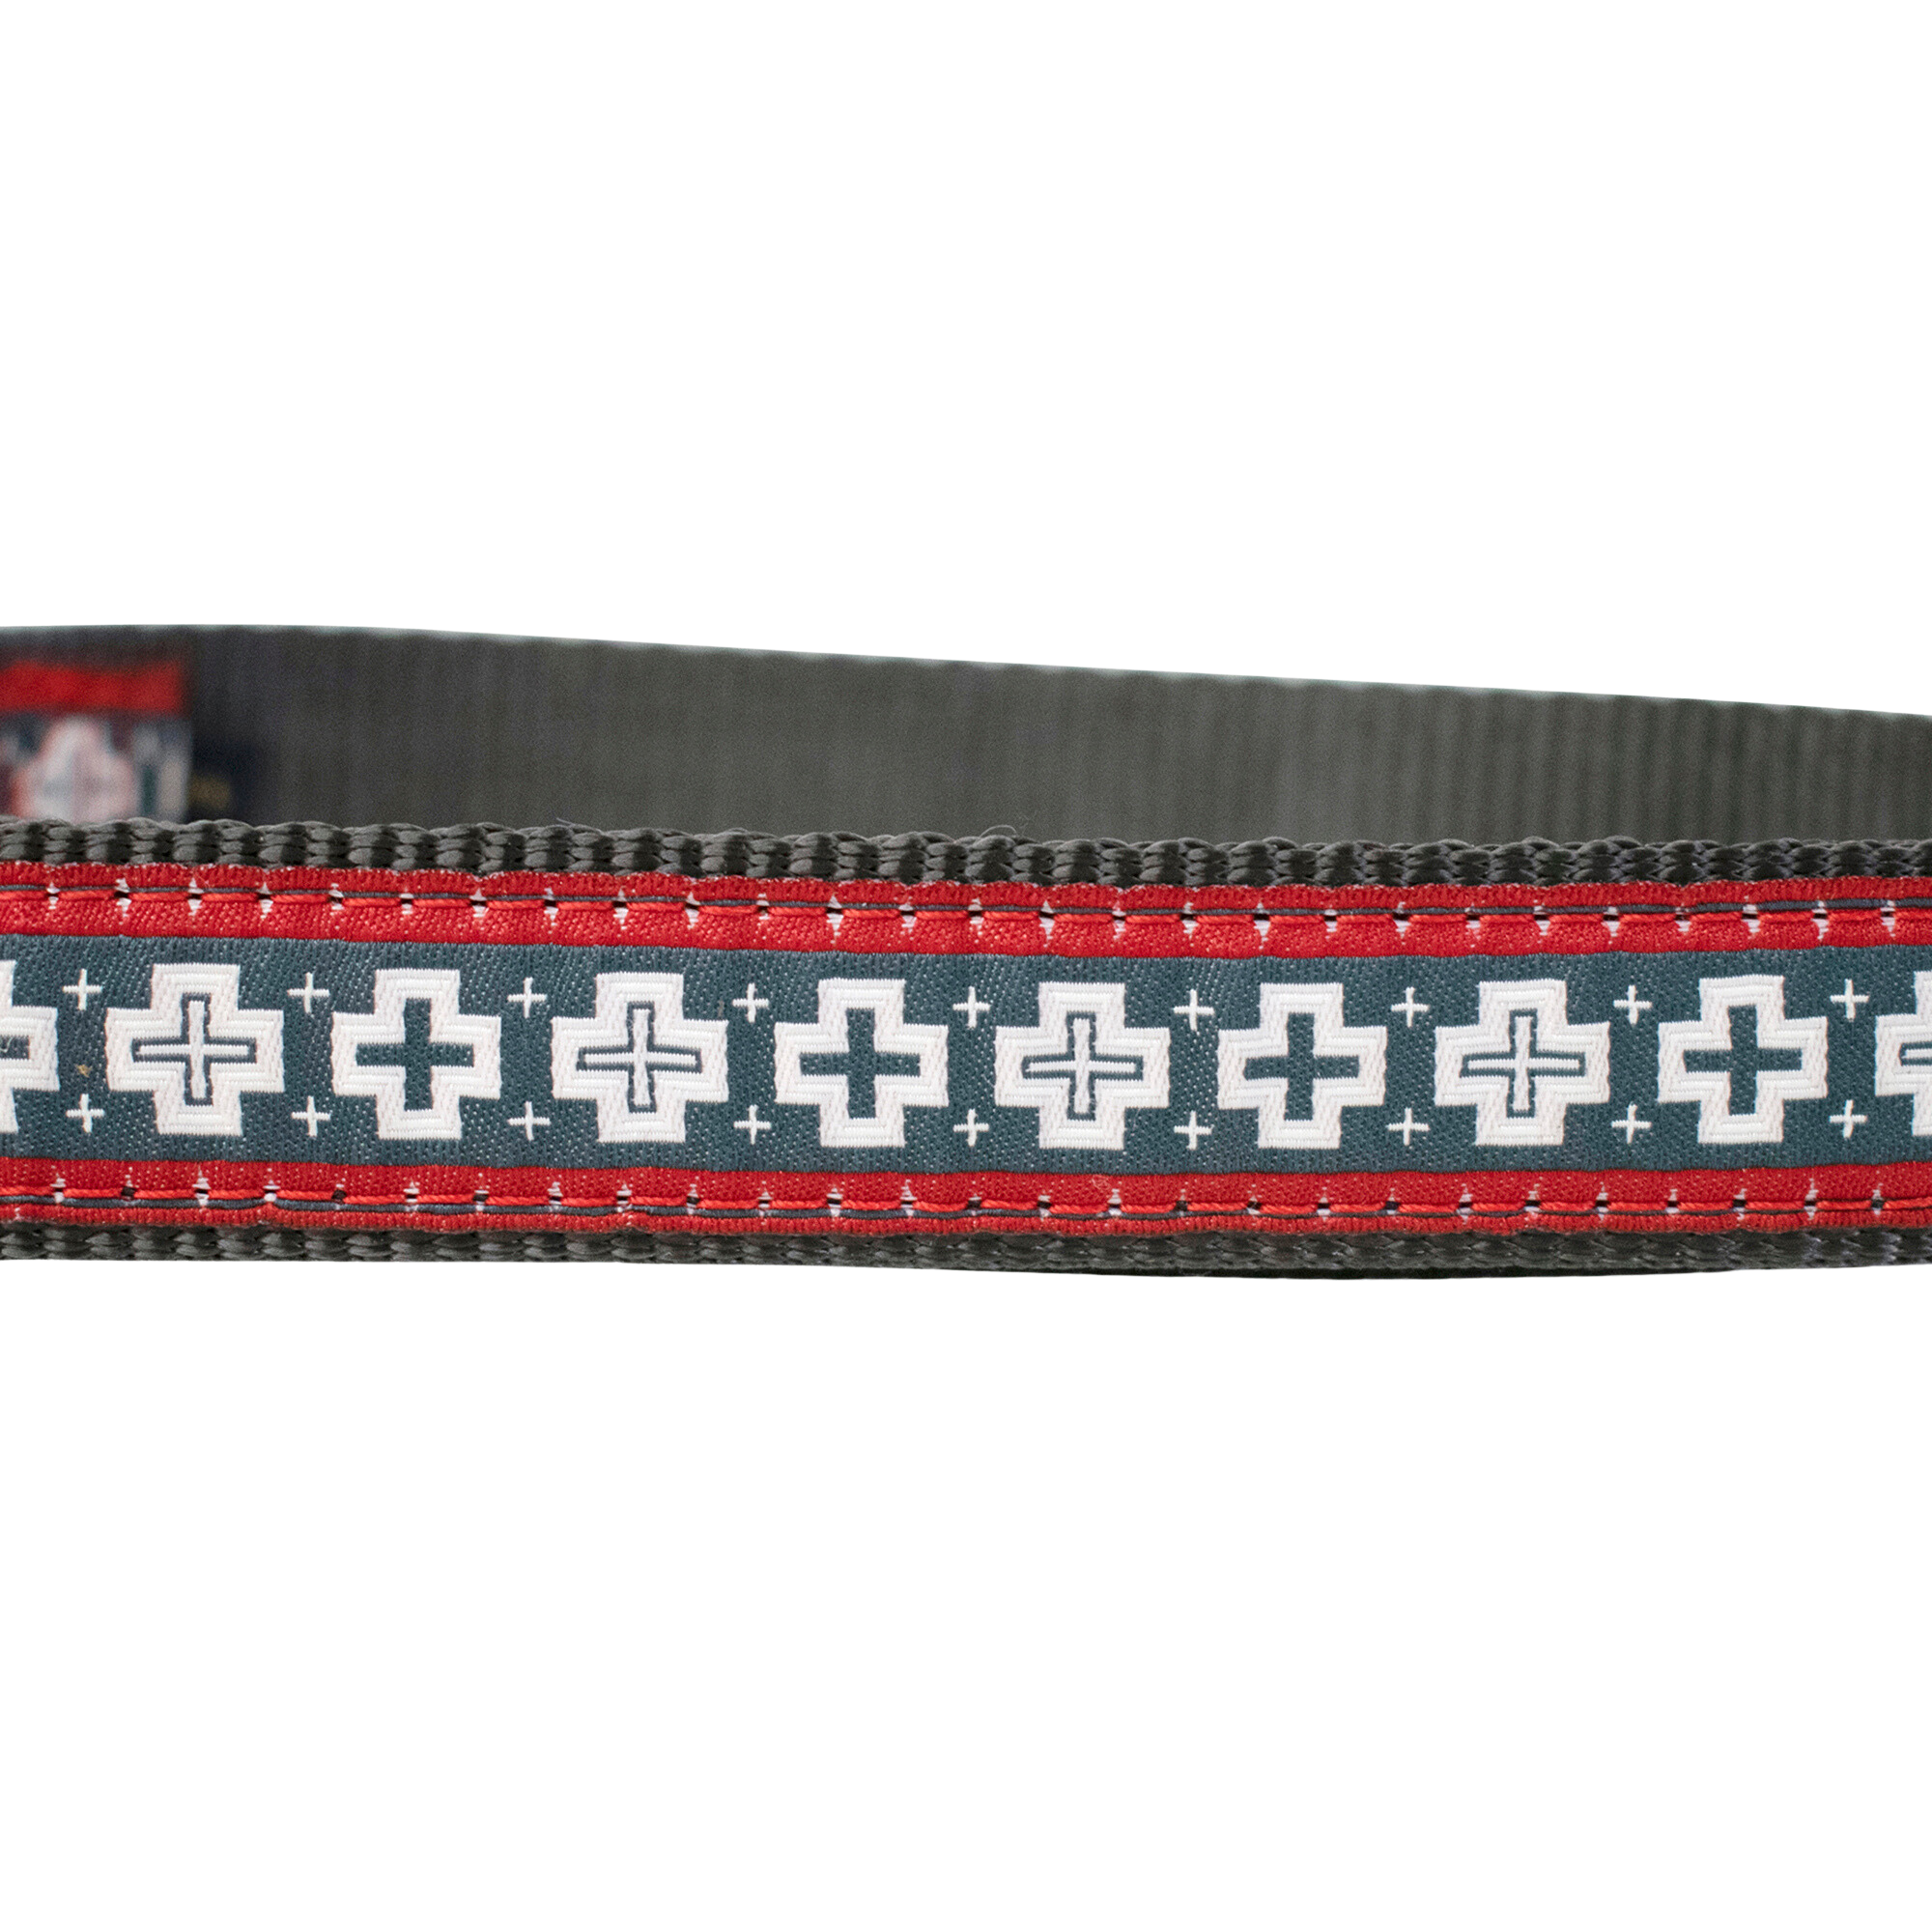 PENDLETON-DOG-COLLAR-LEASH-WHITE-RED-GRAY-SAN-MIGUEL-CLASSICS-COLLECTION